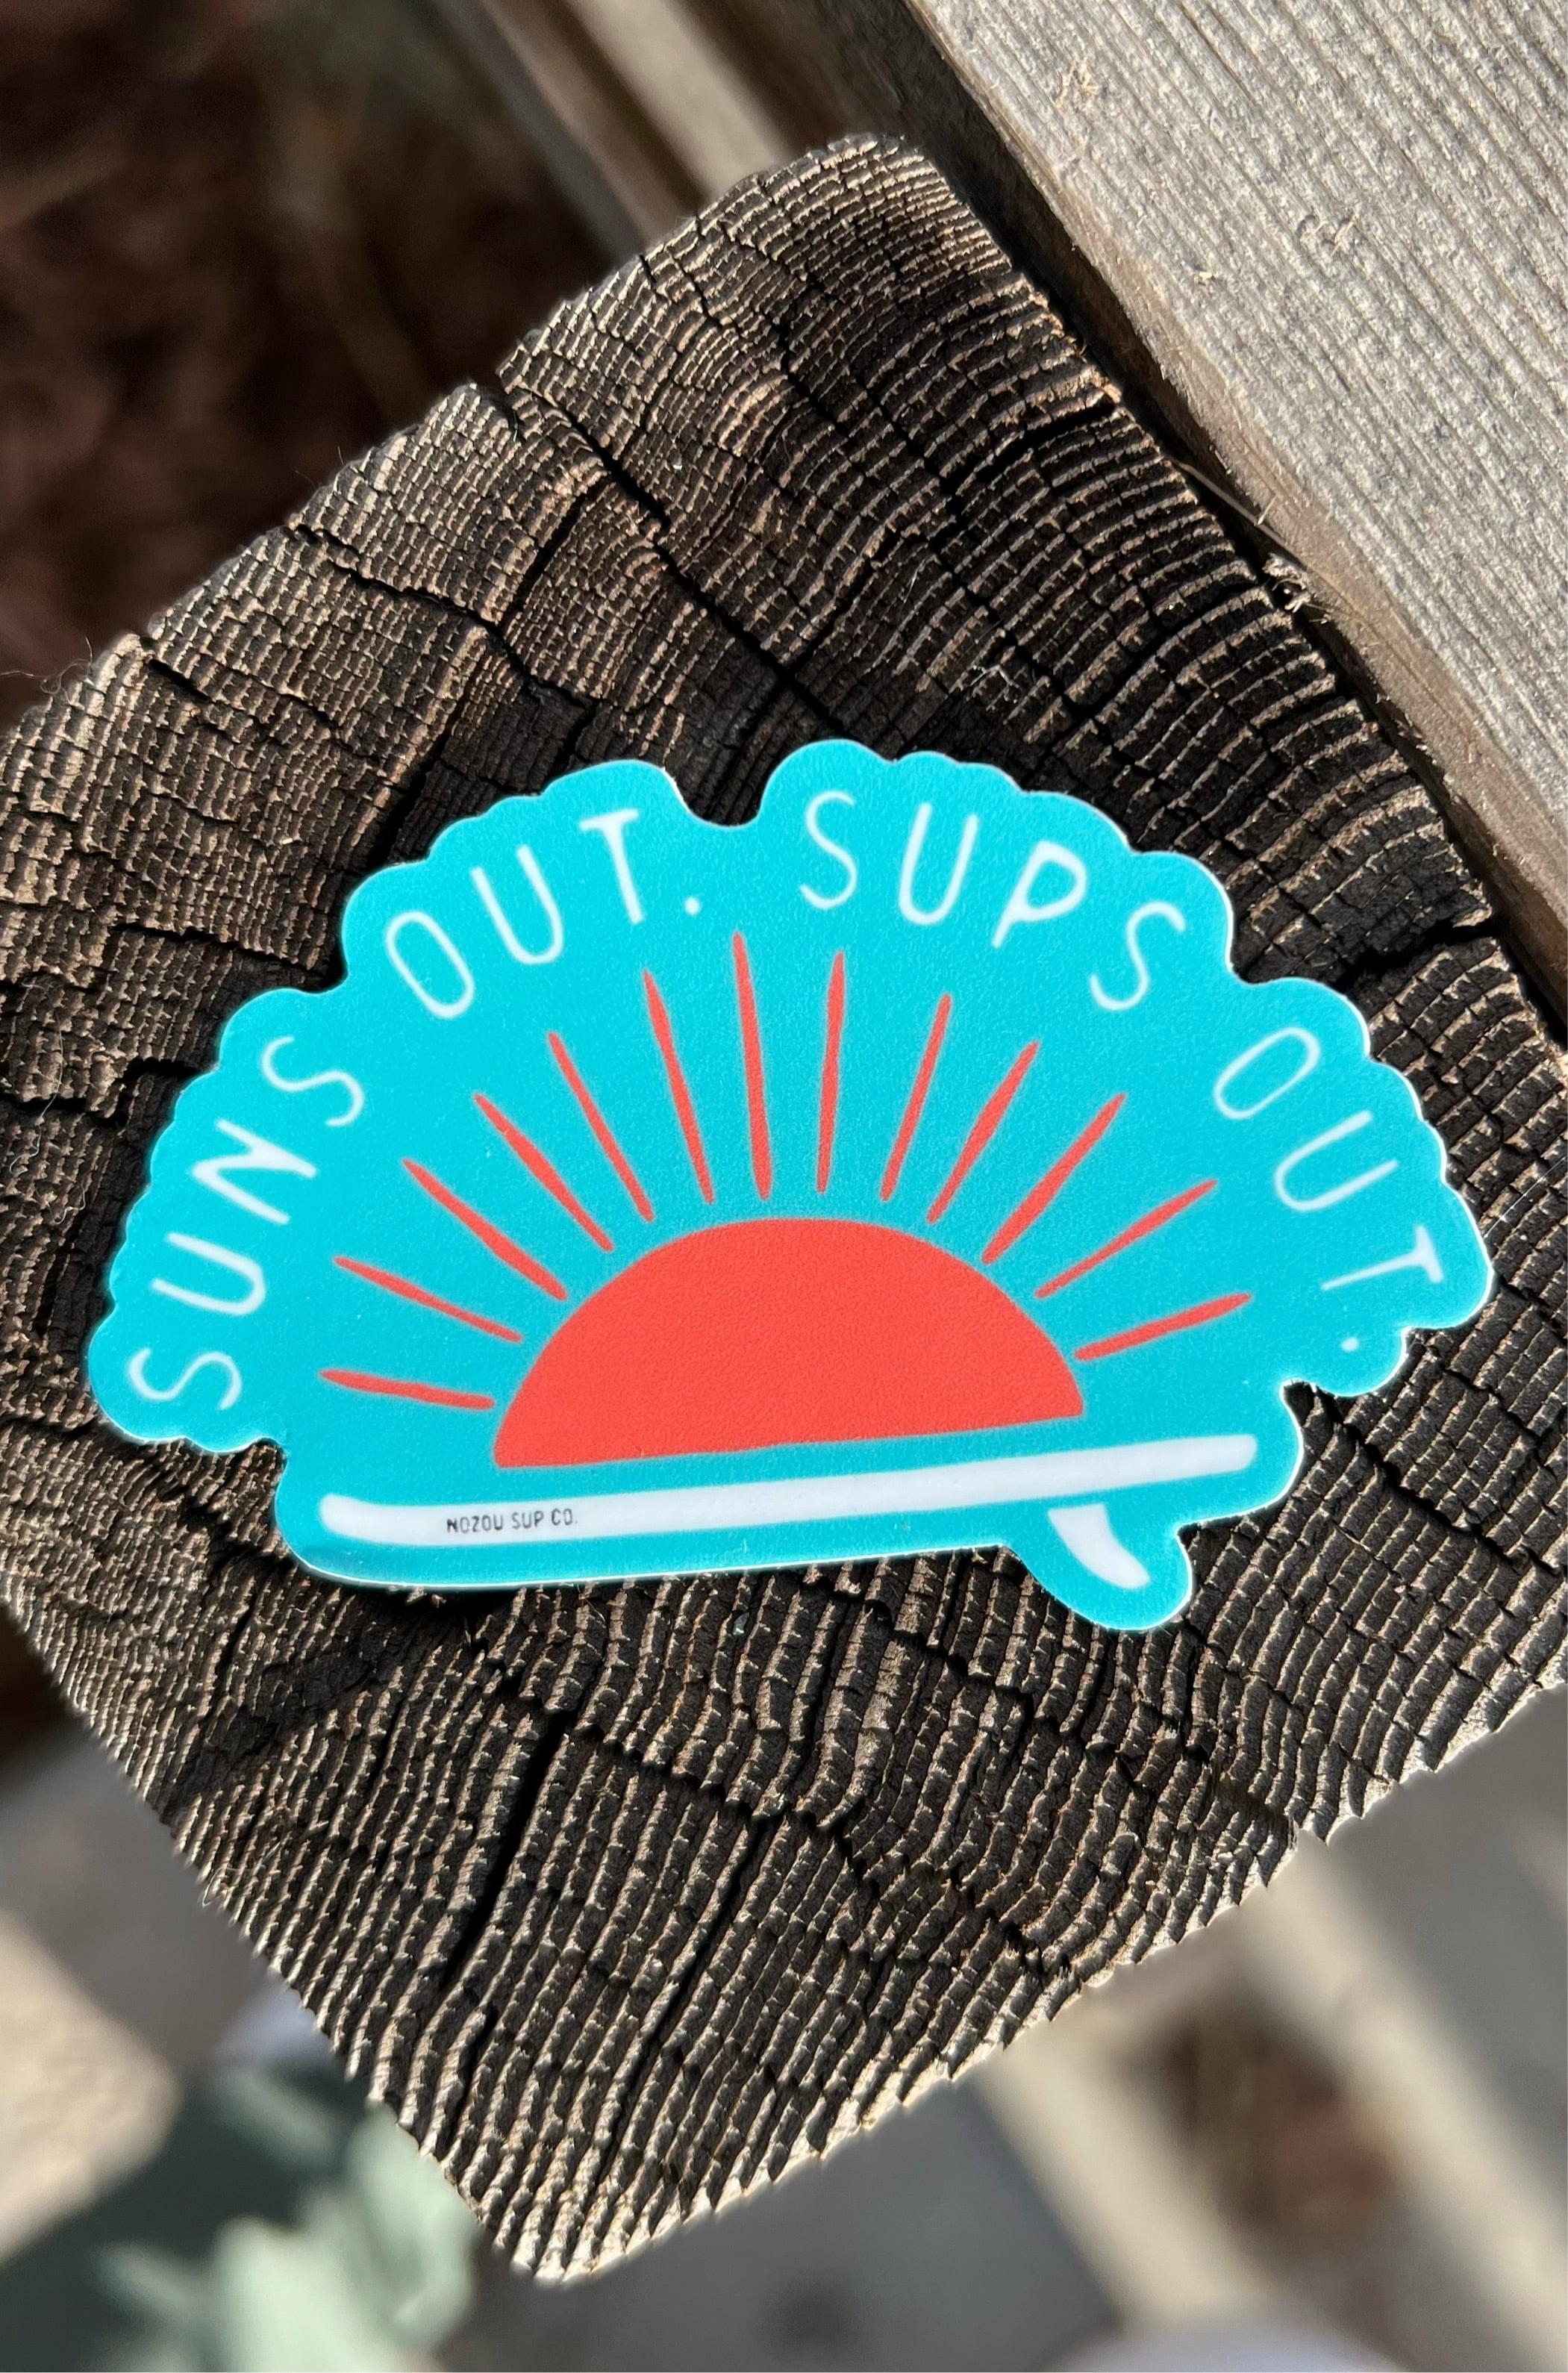 Back in Stock! Suns Out SUPs Out Sticker